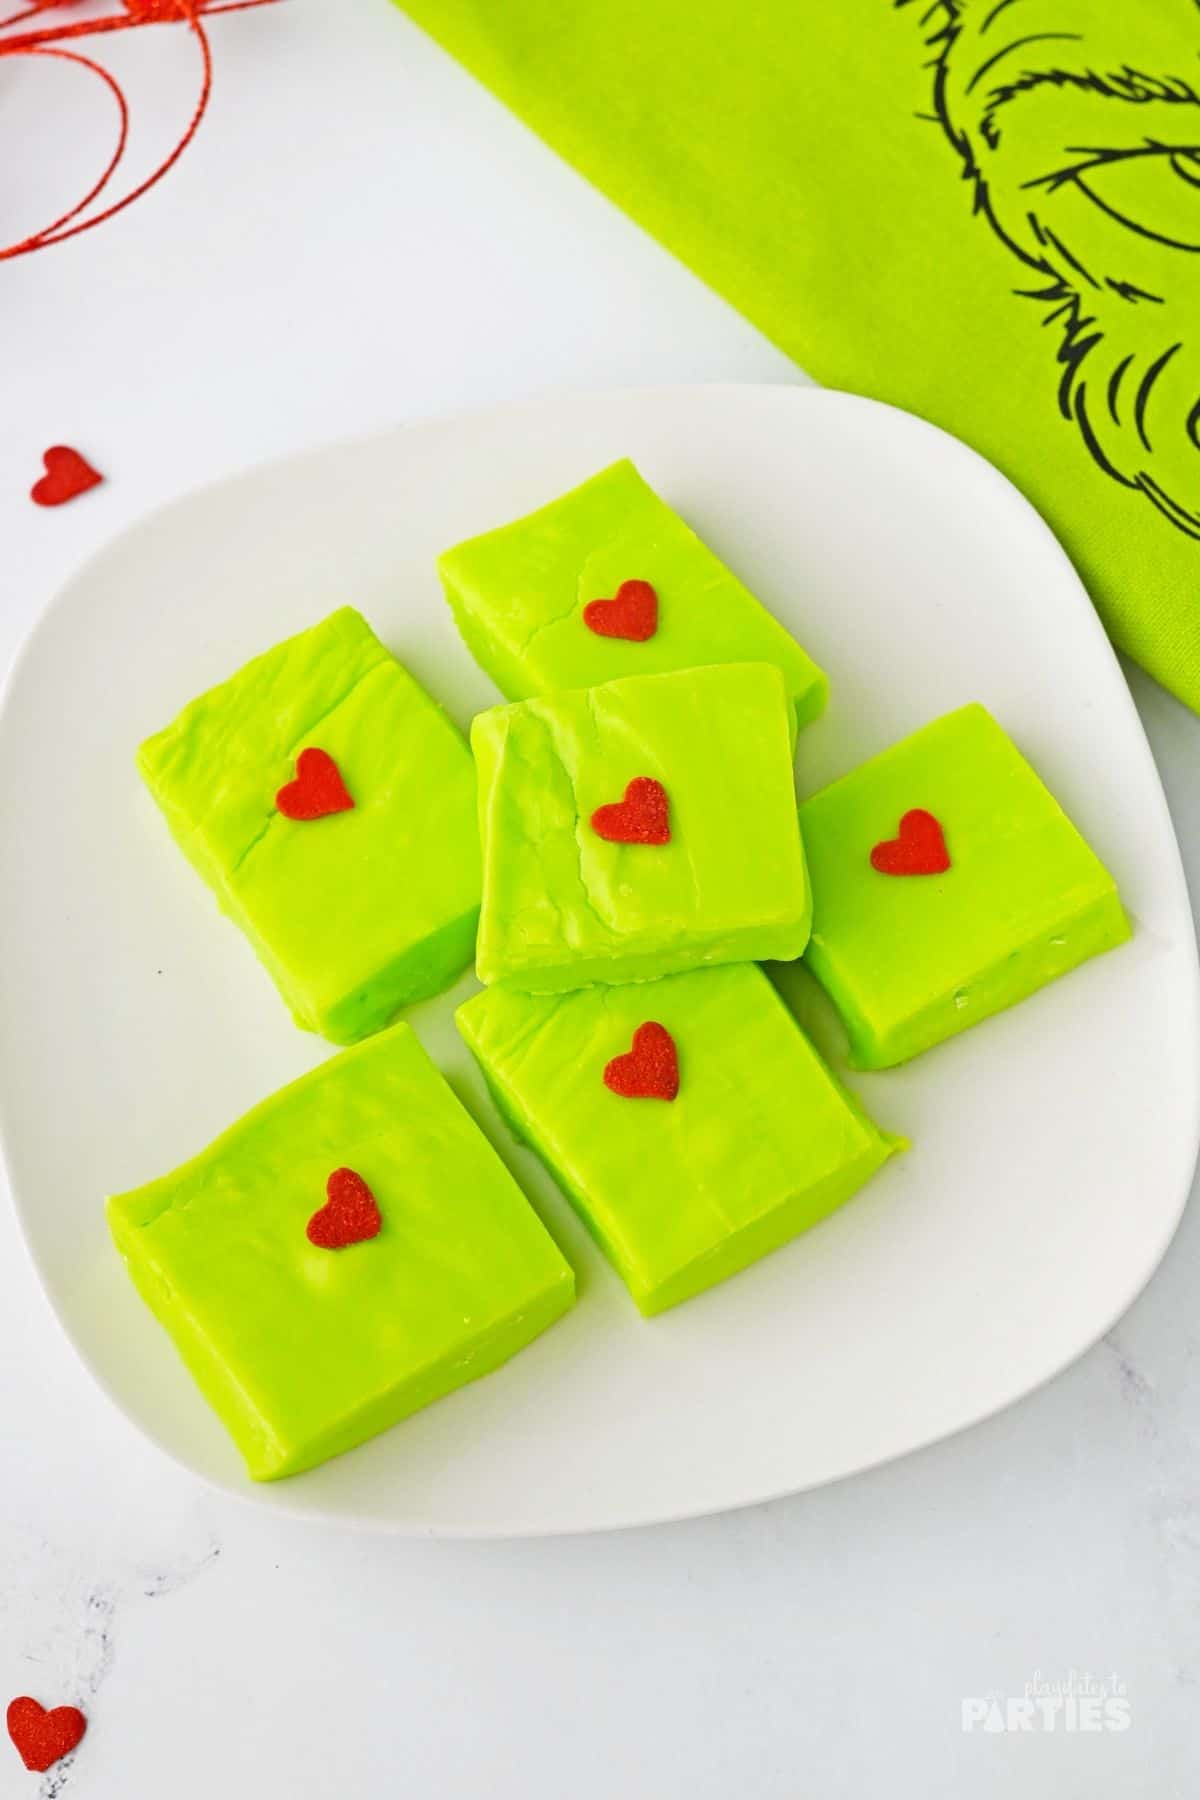 Six large squares of green Grinch Christmas fudge sit on a white plate.